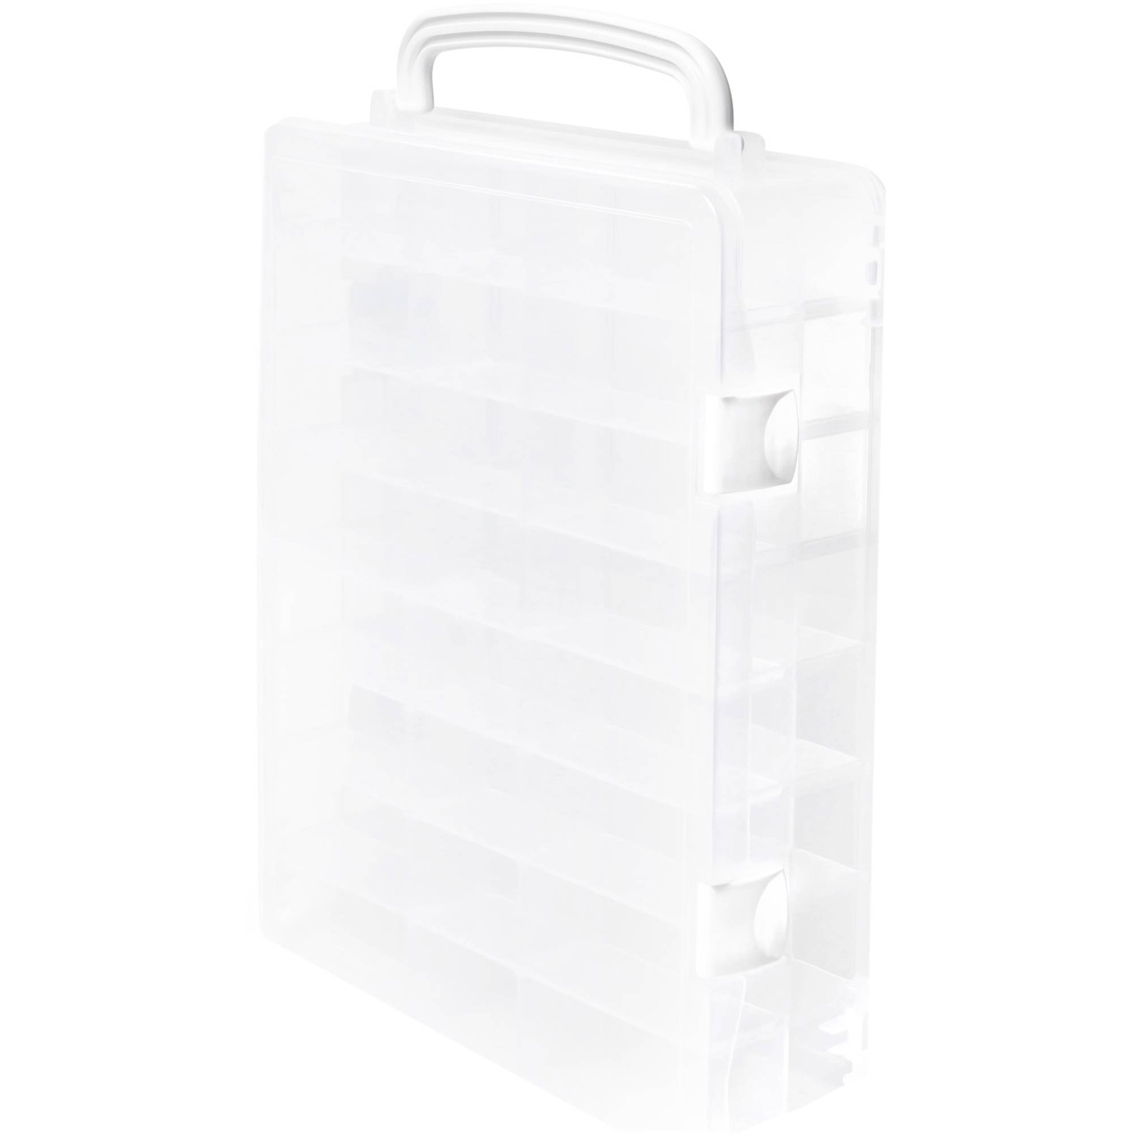 Dritz Thread Storage Box with 48 Compartments - Image 4 of 6